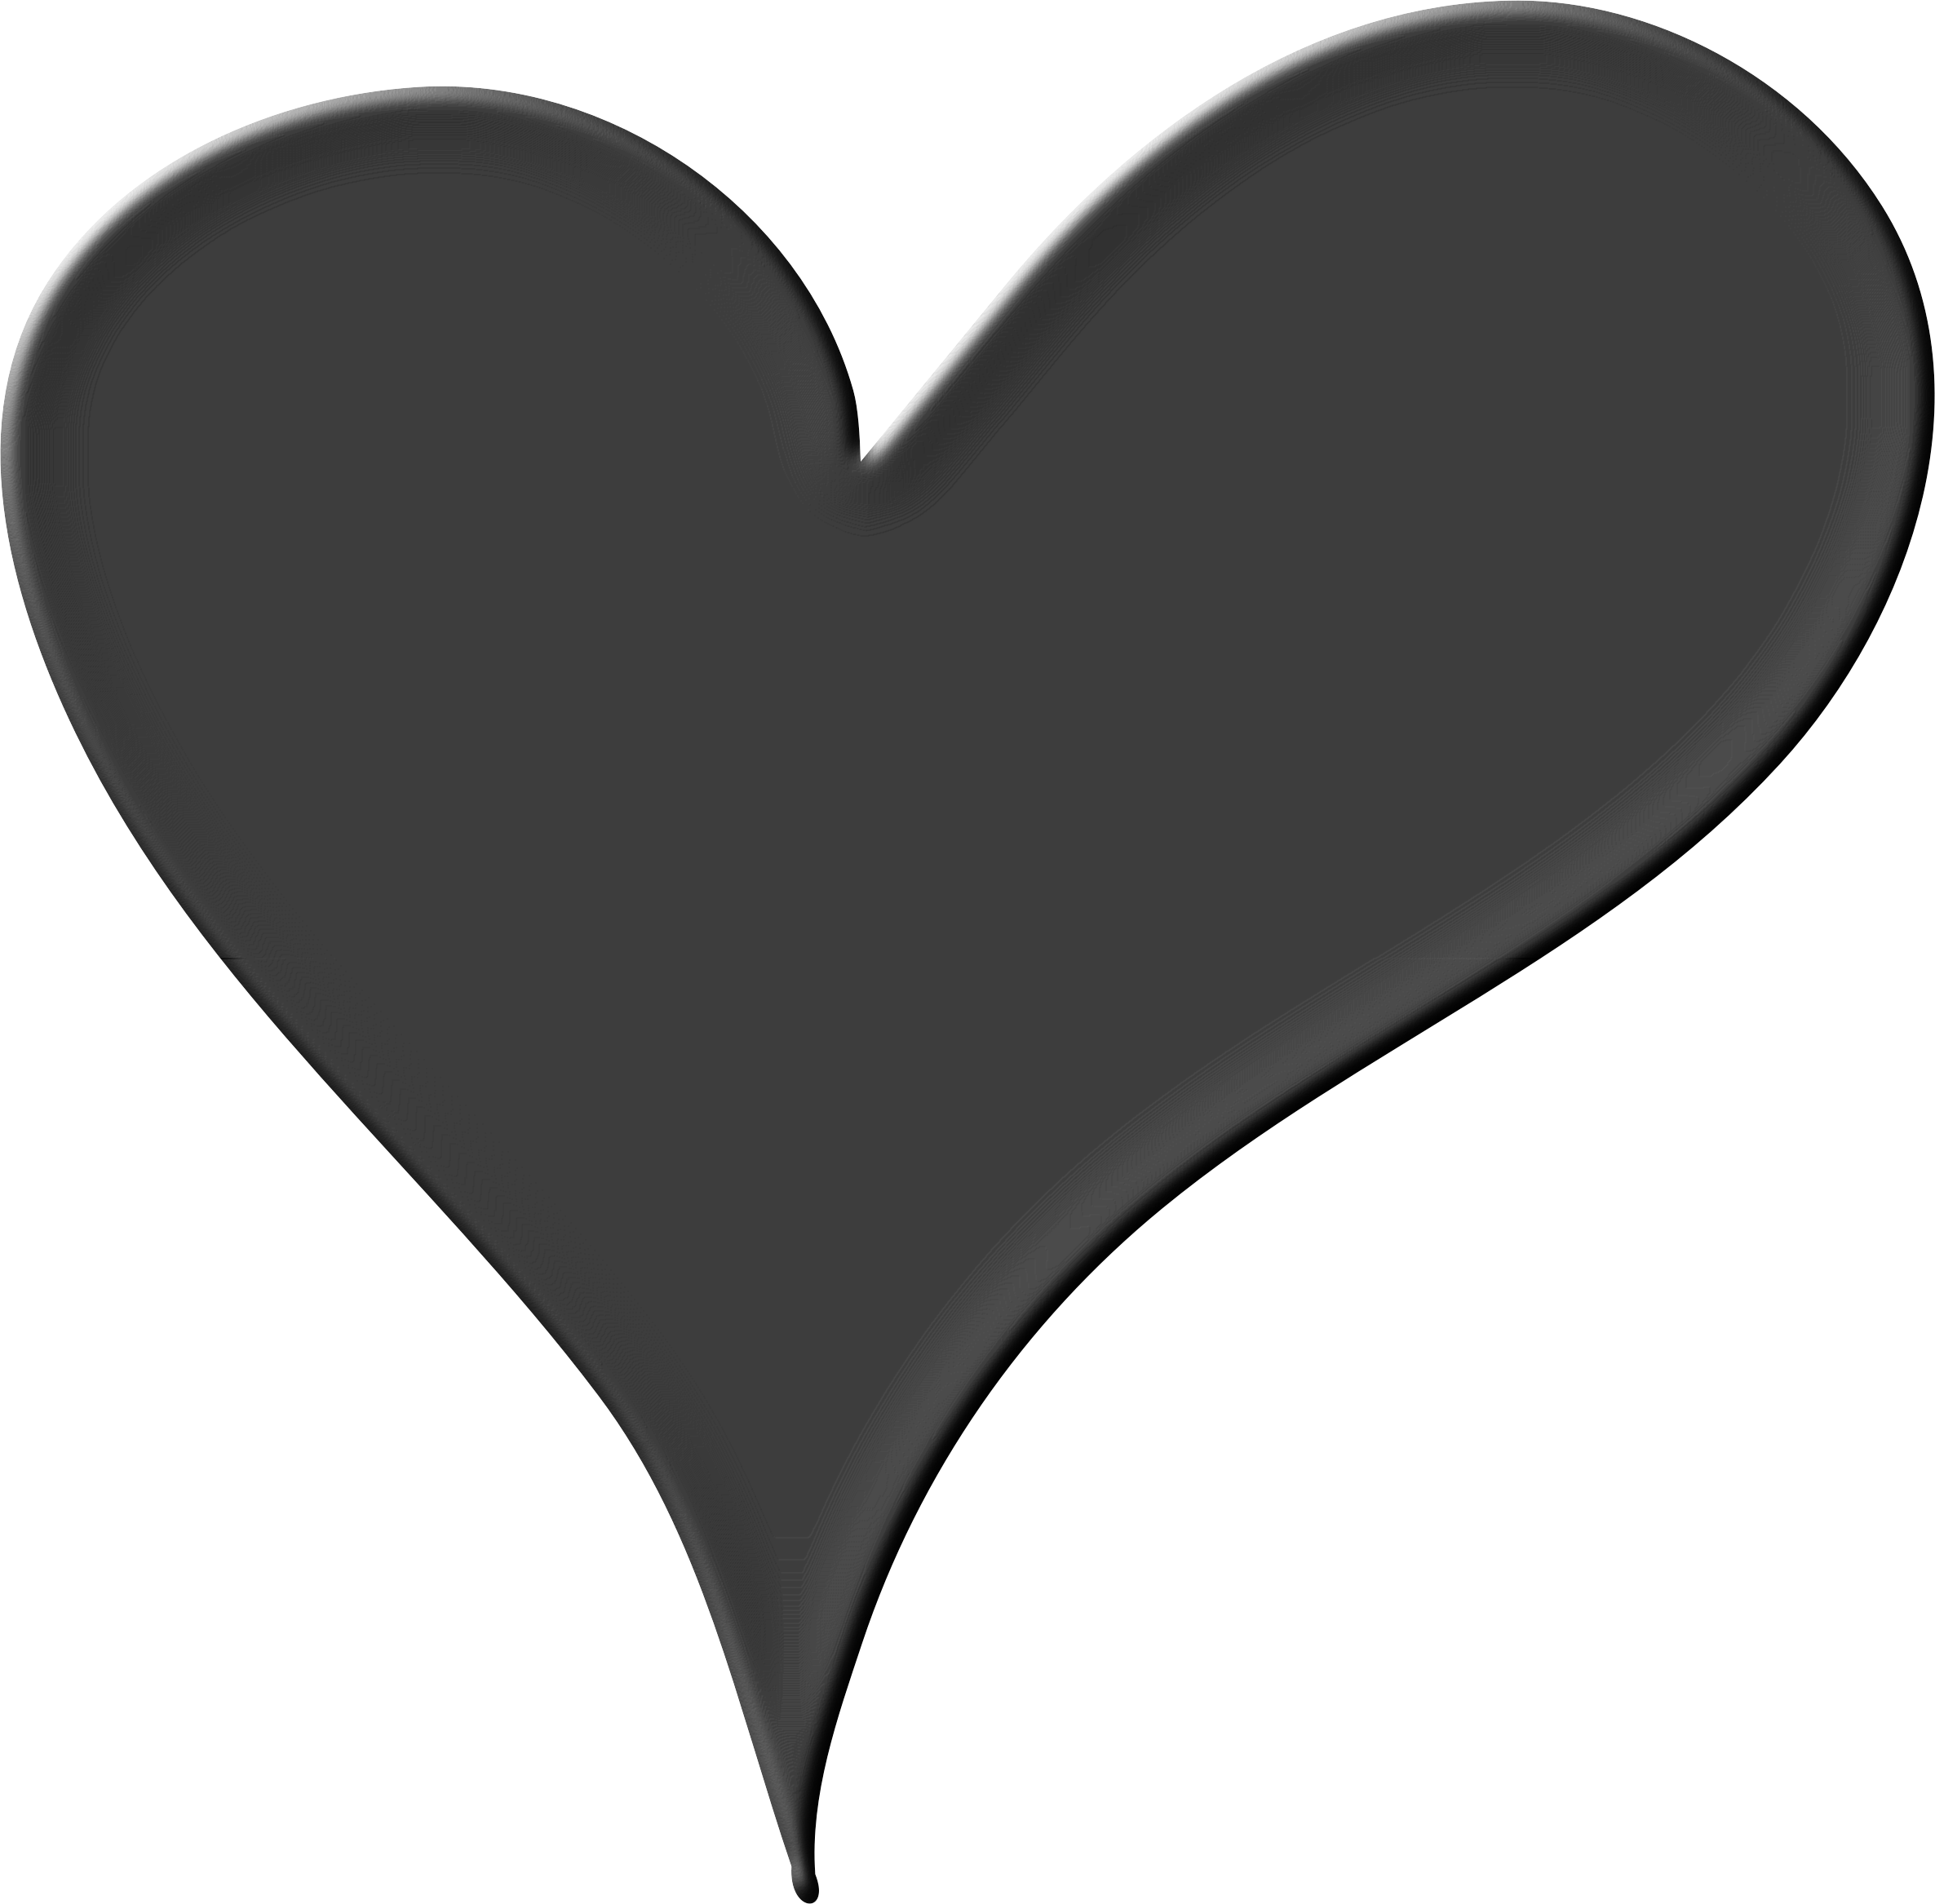 Big Image - Heart Clipart Png Black And White (2372x2334)